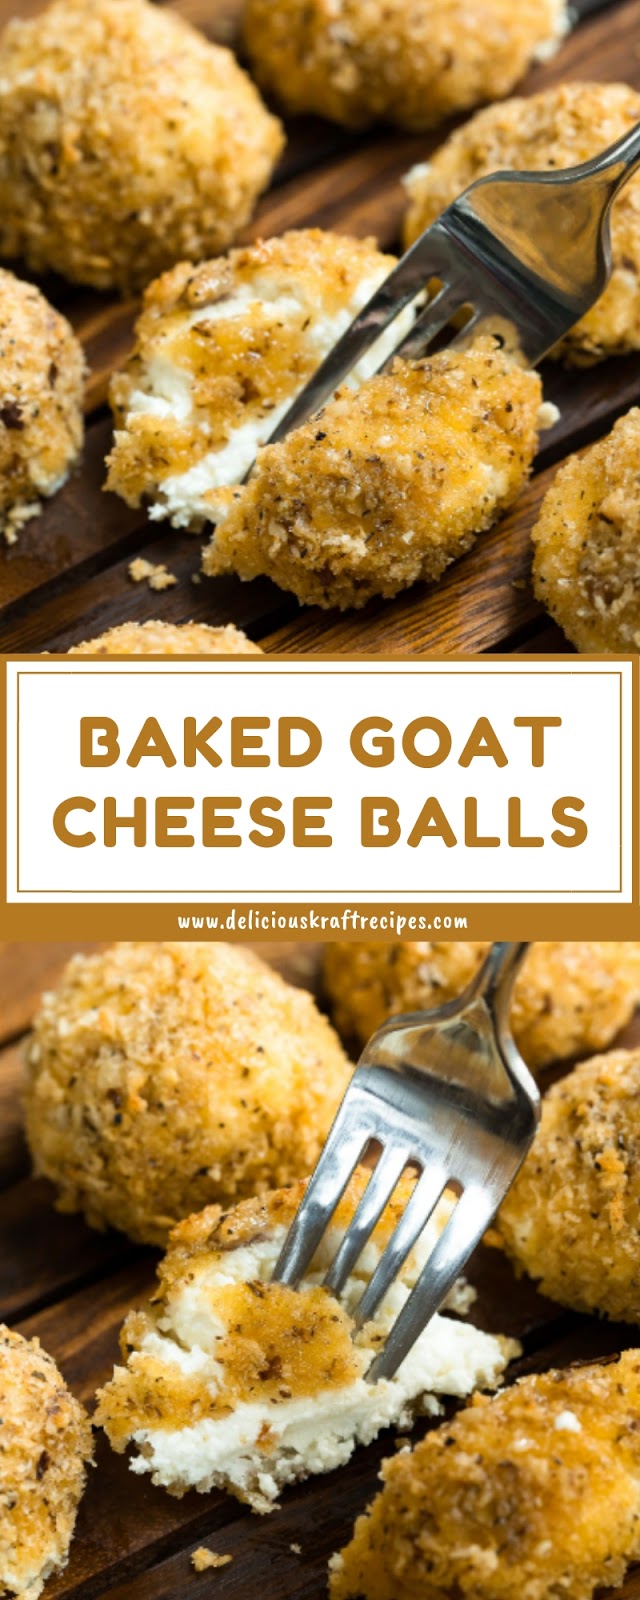 BAKED GOAT CHEESE BALLS